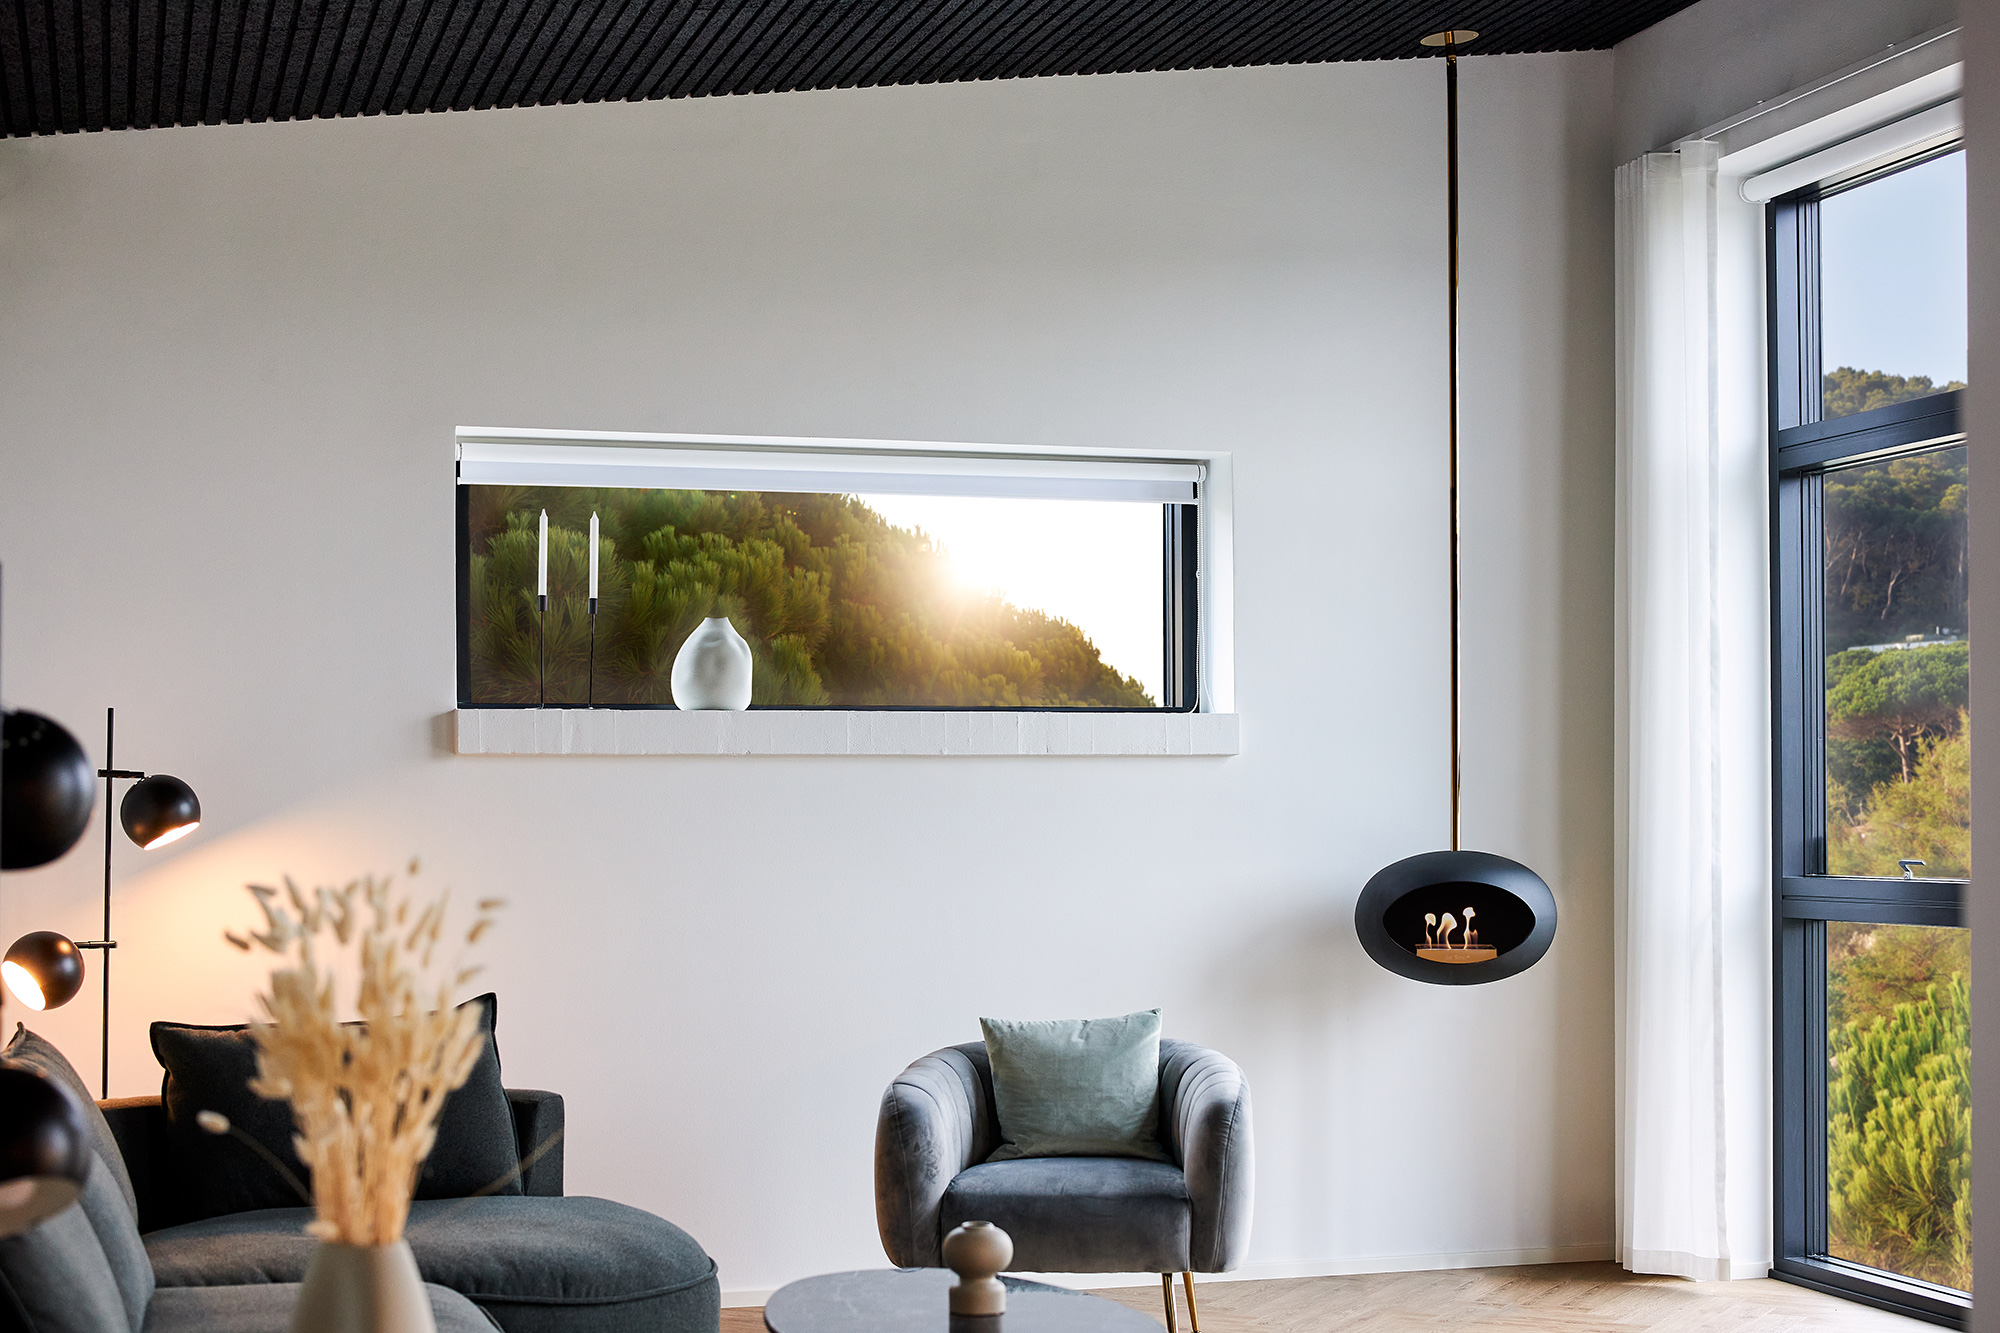 Le Feu electric fireplace hanging from the ceiling 